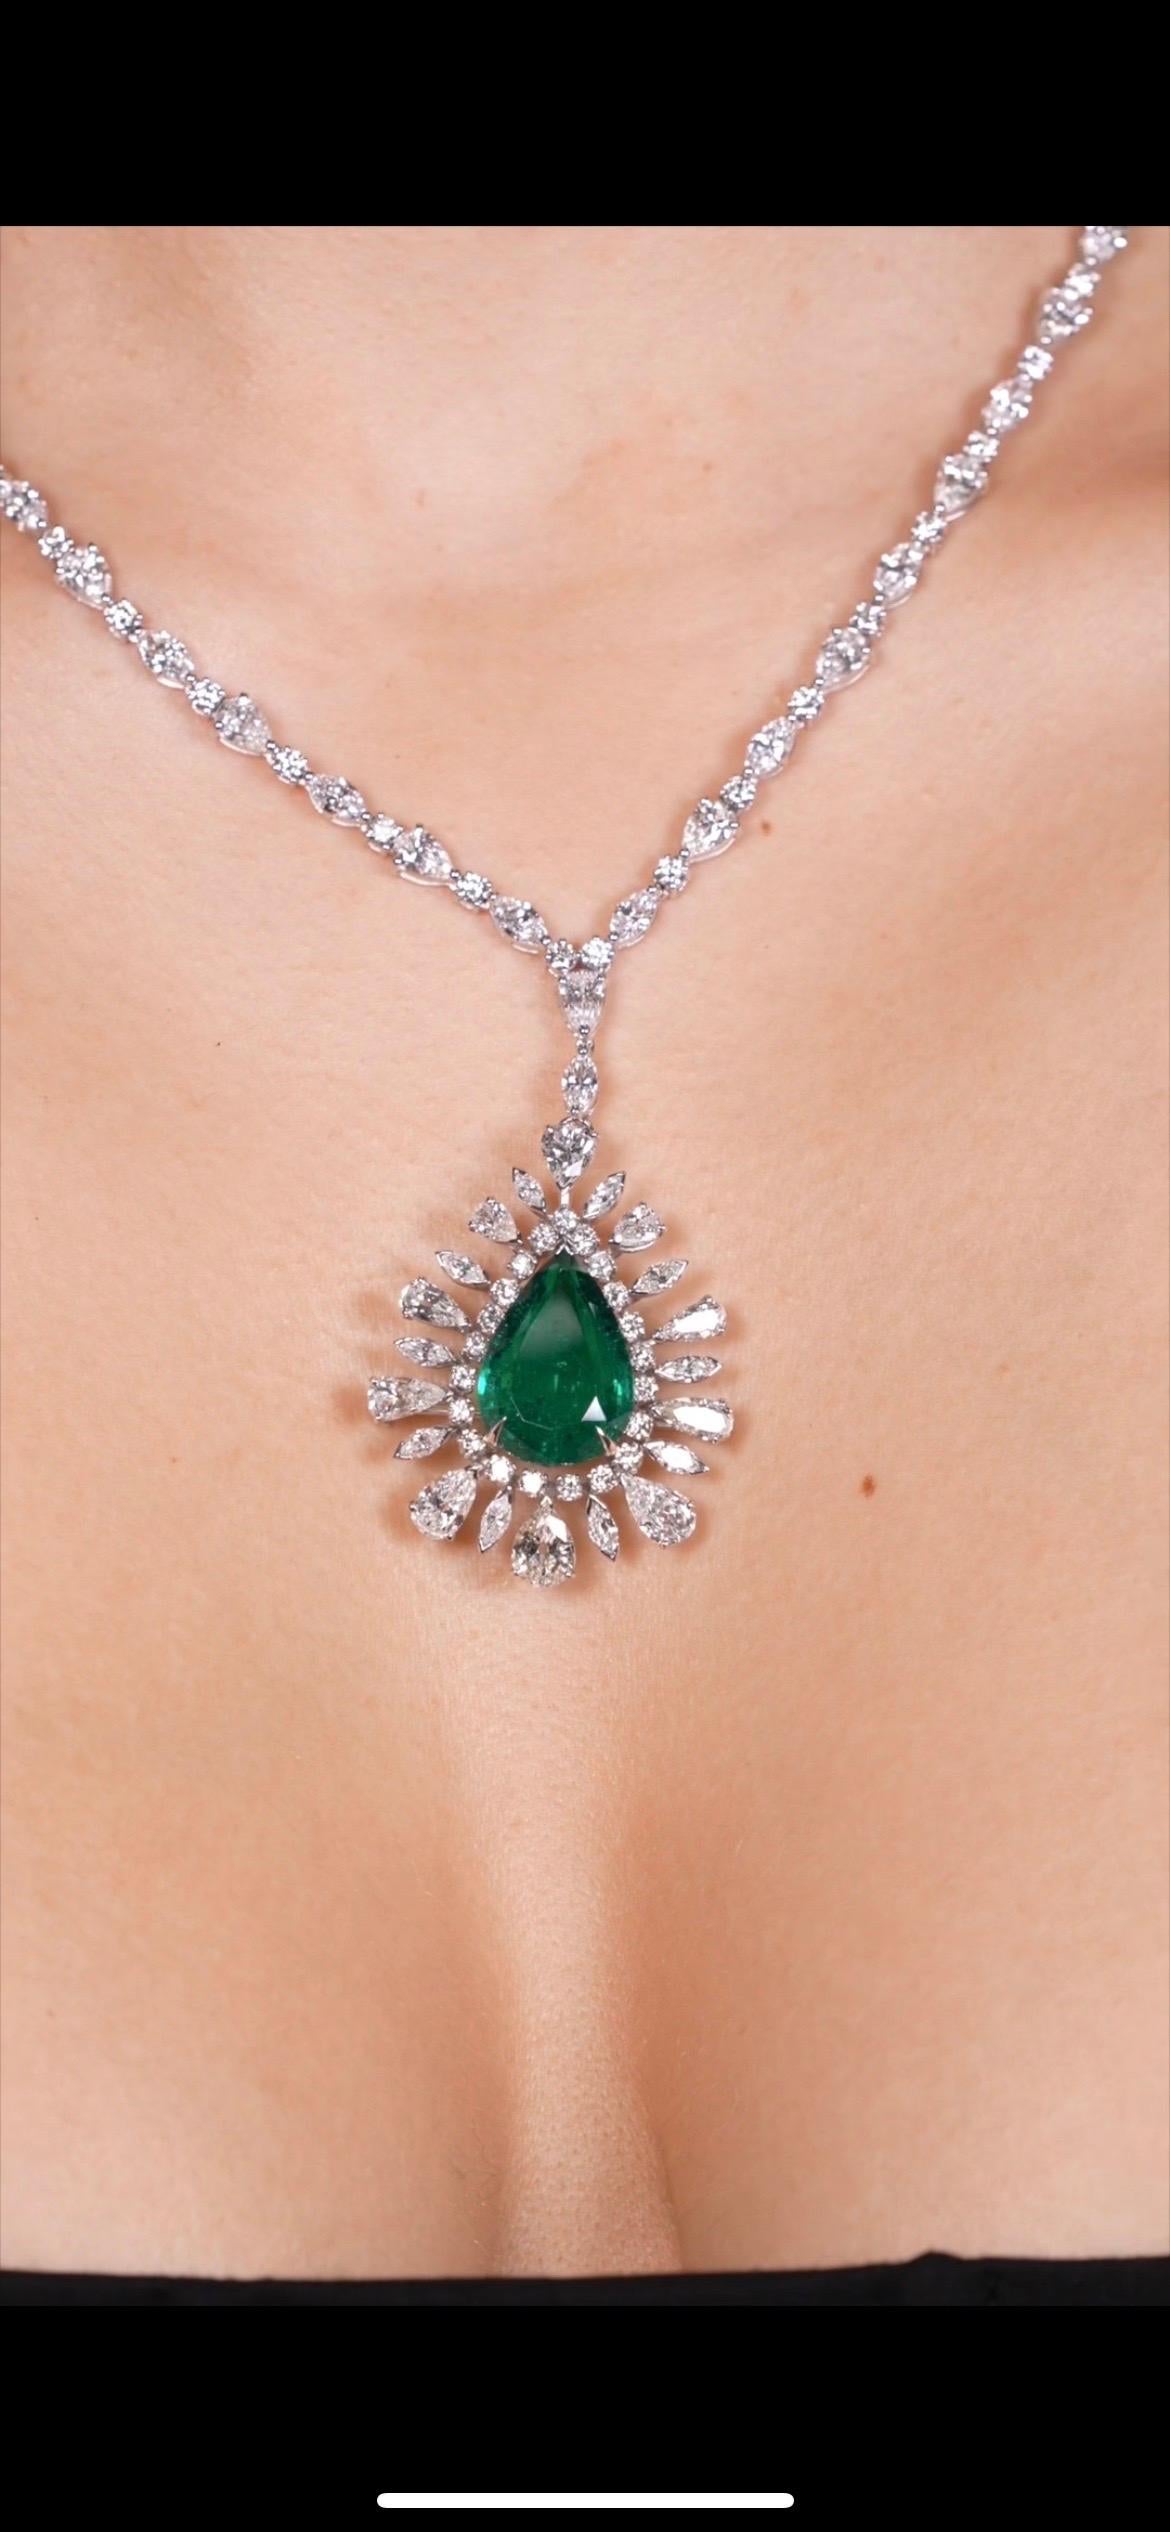 18k White Gold
Columbian Green Emerald is No Oil (F1) 9.34ct GIA Certified
21.39ct Total Diamond Weight 
Designed, Handpicked, & Manufactured From Scratch In Los Angeles Using Only The Finest Materials and Workmanship